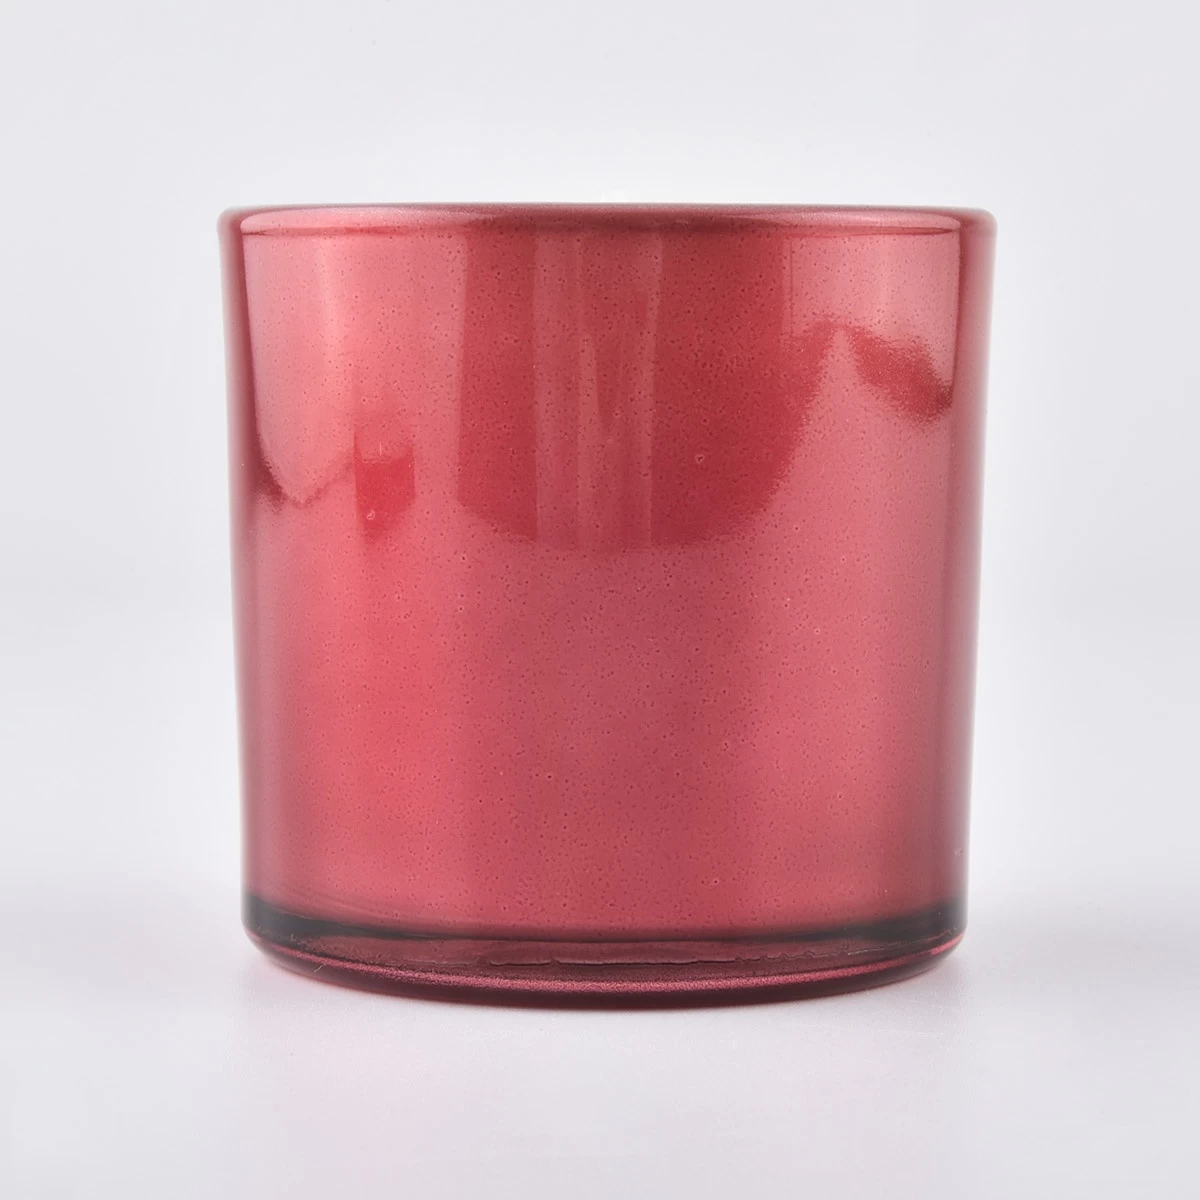 Sunny design custom luxury glass candle containers reuse manufacturer